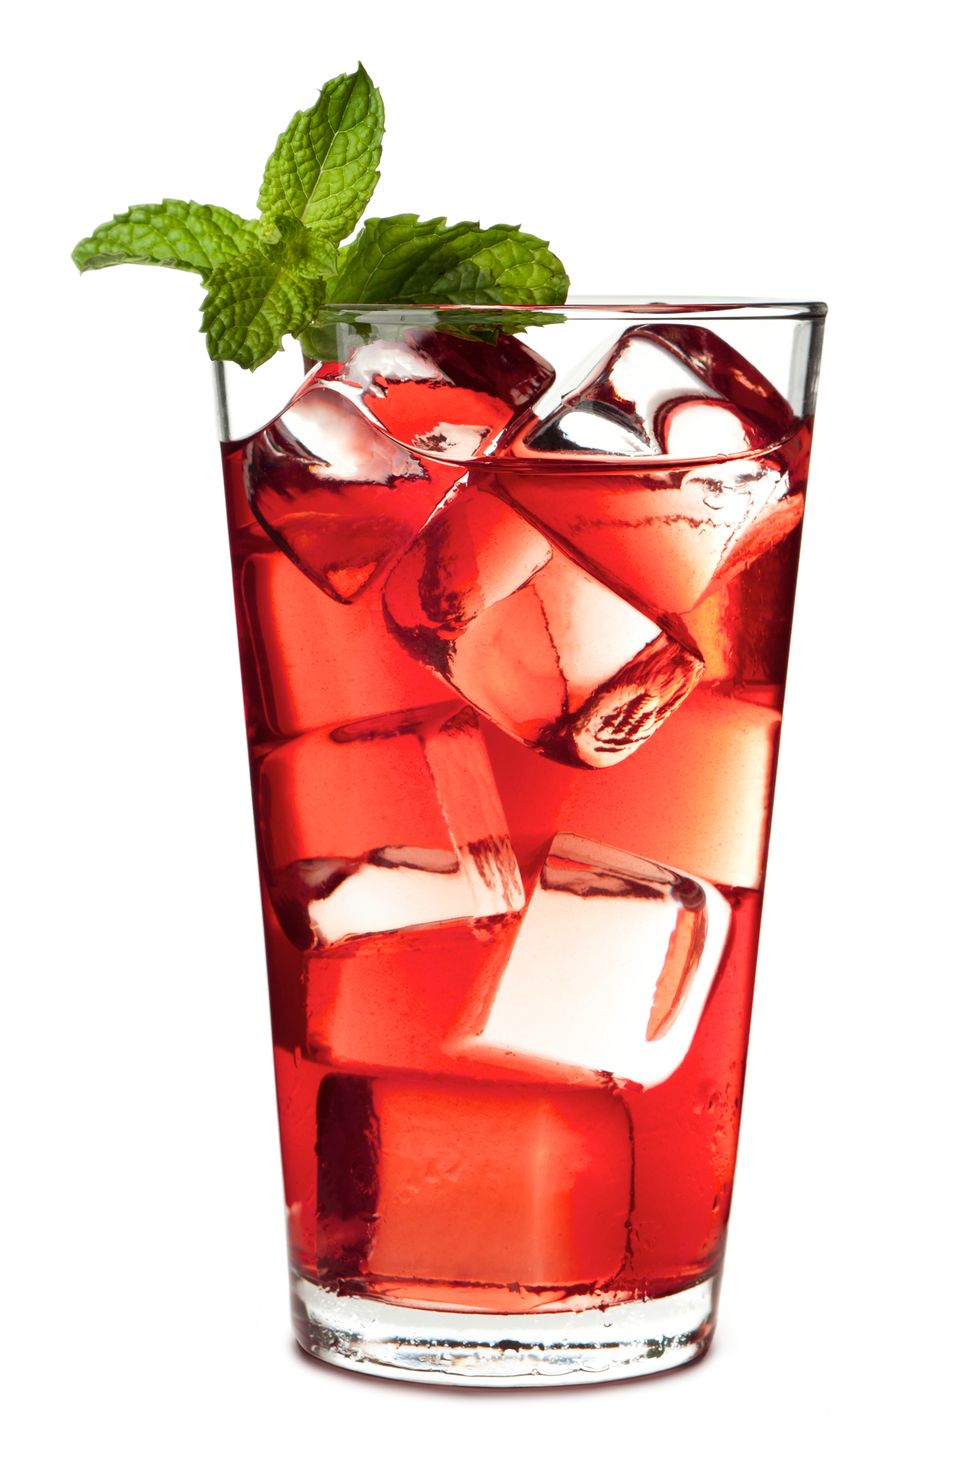 Drink, Highball glass, Woo woo, Cocktail garnish, Cocktail, Alcoholic beverage, Cranberry juice, Red russian, Non-alcoholic beverage, Sea breeze, 